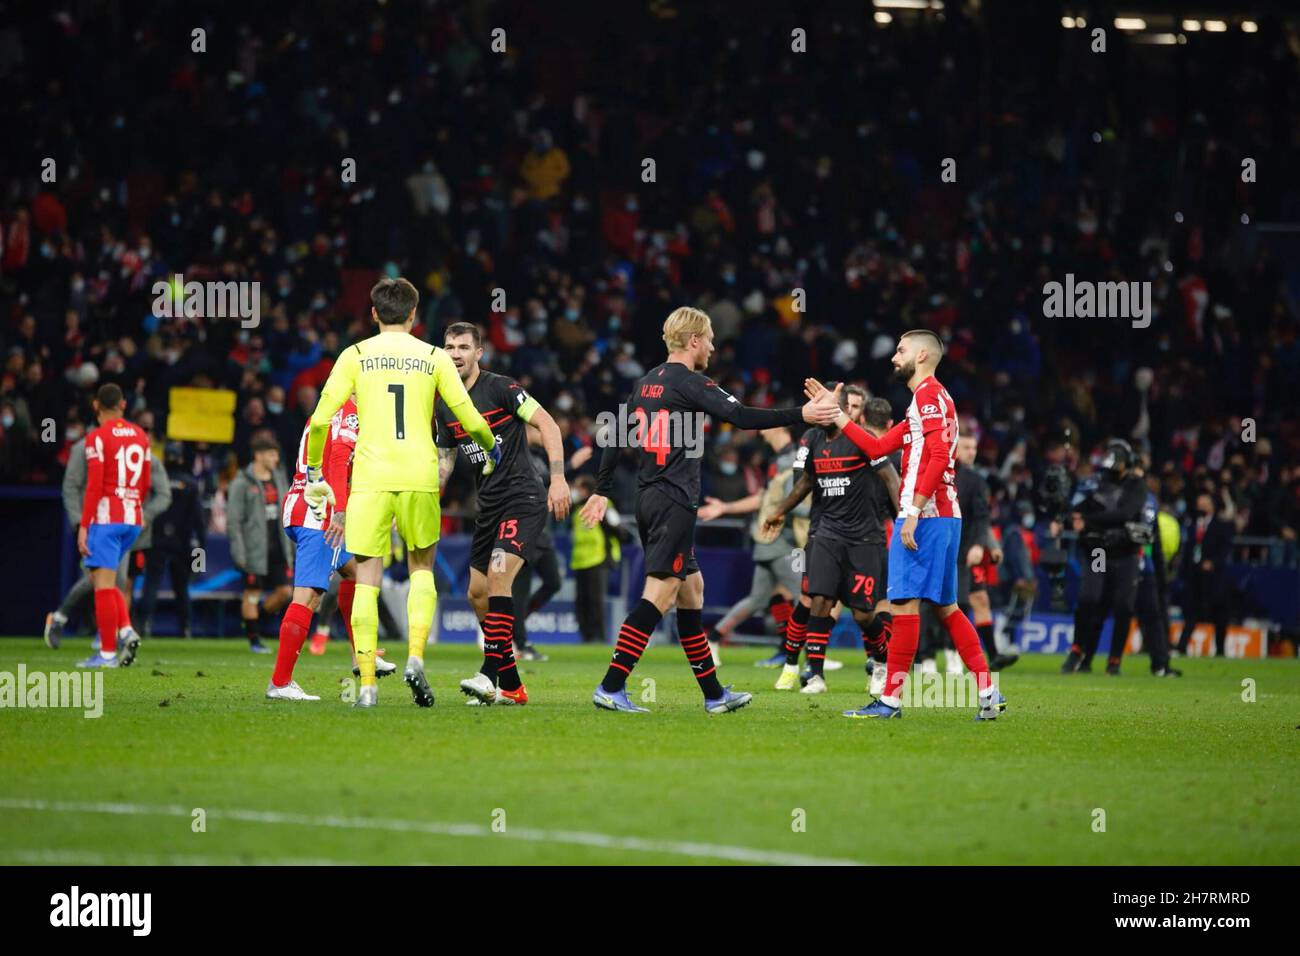 Madrid, Spain. 24th Nov, 2021. Correa player from Atletico de Madrid, during the UEFA Champions League group stage against AC Milan at the Wanda Metropolitano stadium. (Photo by: Ivan Abanades Medina Credit: CORDON PRESS/Alamy Live News Stock Photo